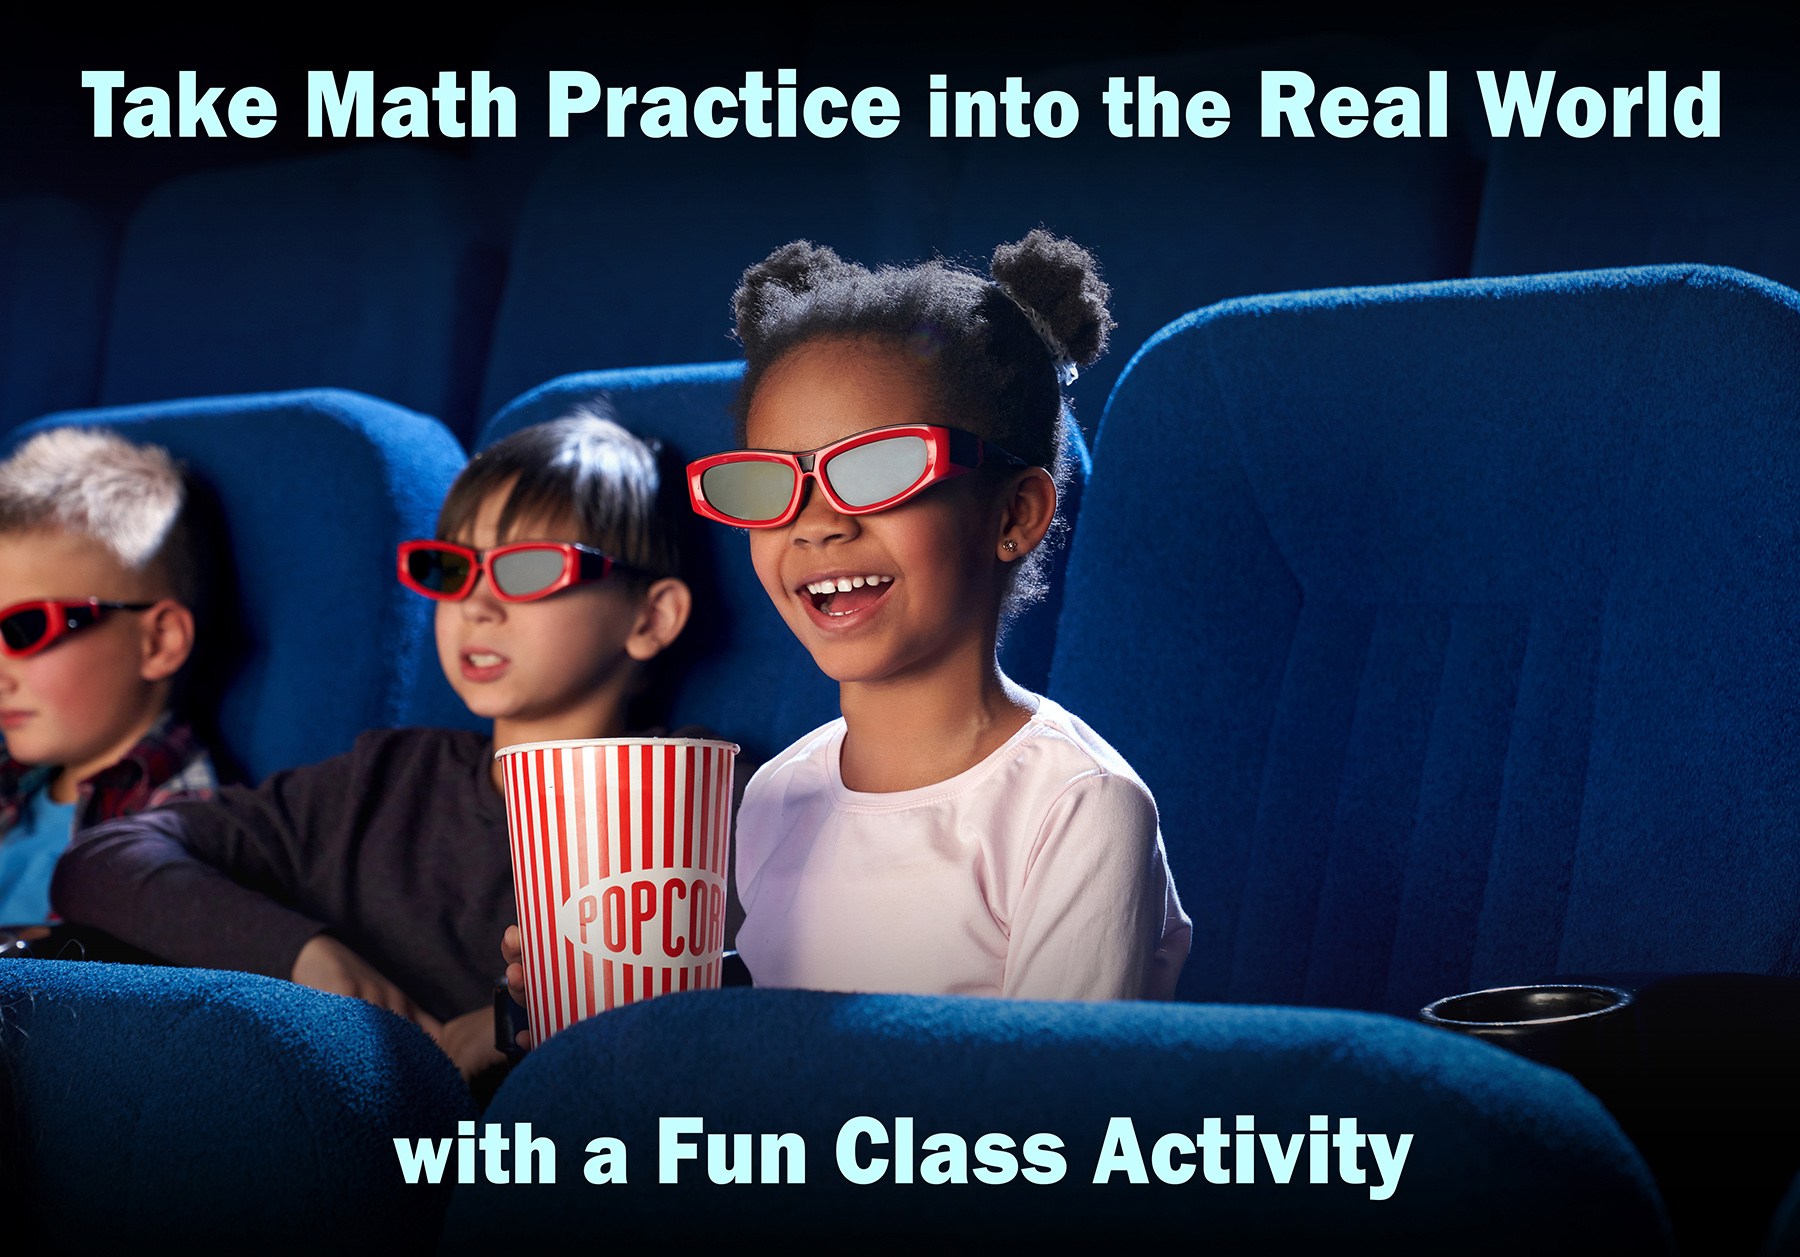 Use Math Skills to Plan a Day at the Movies 